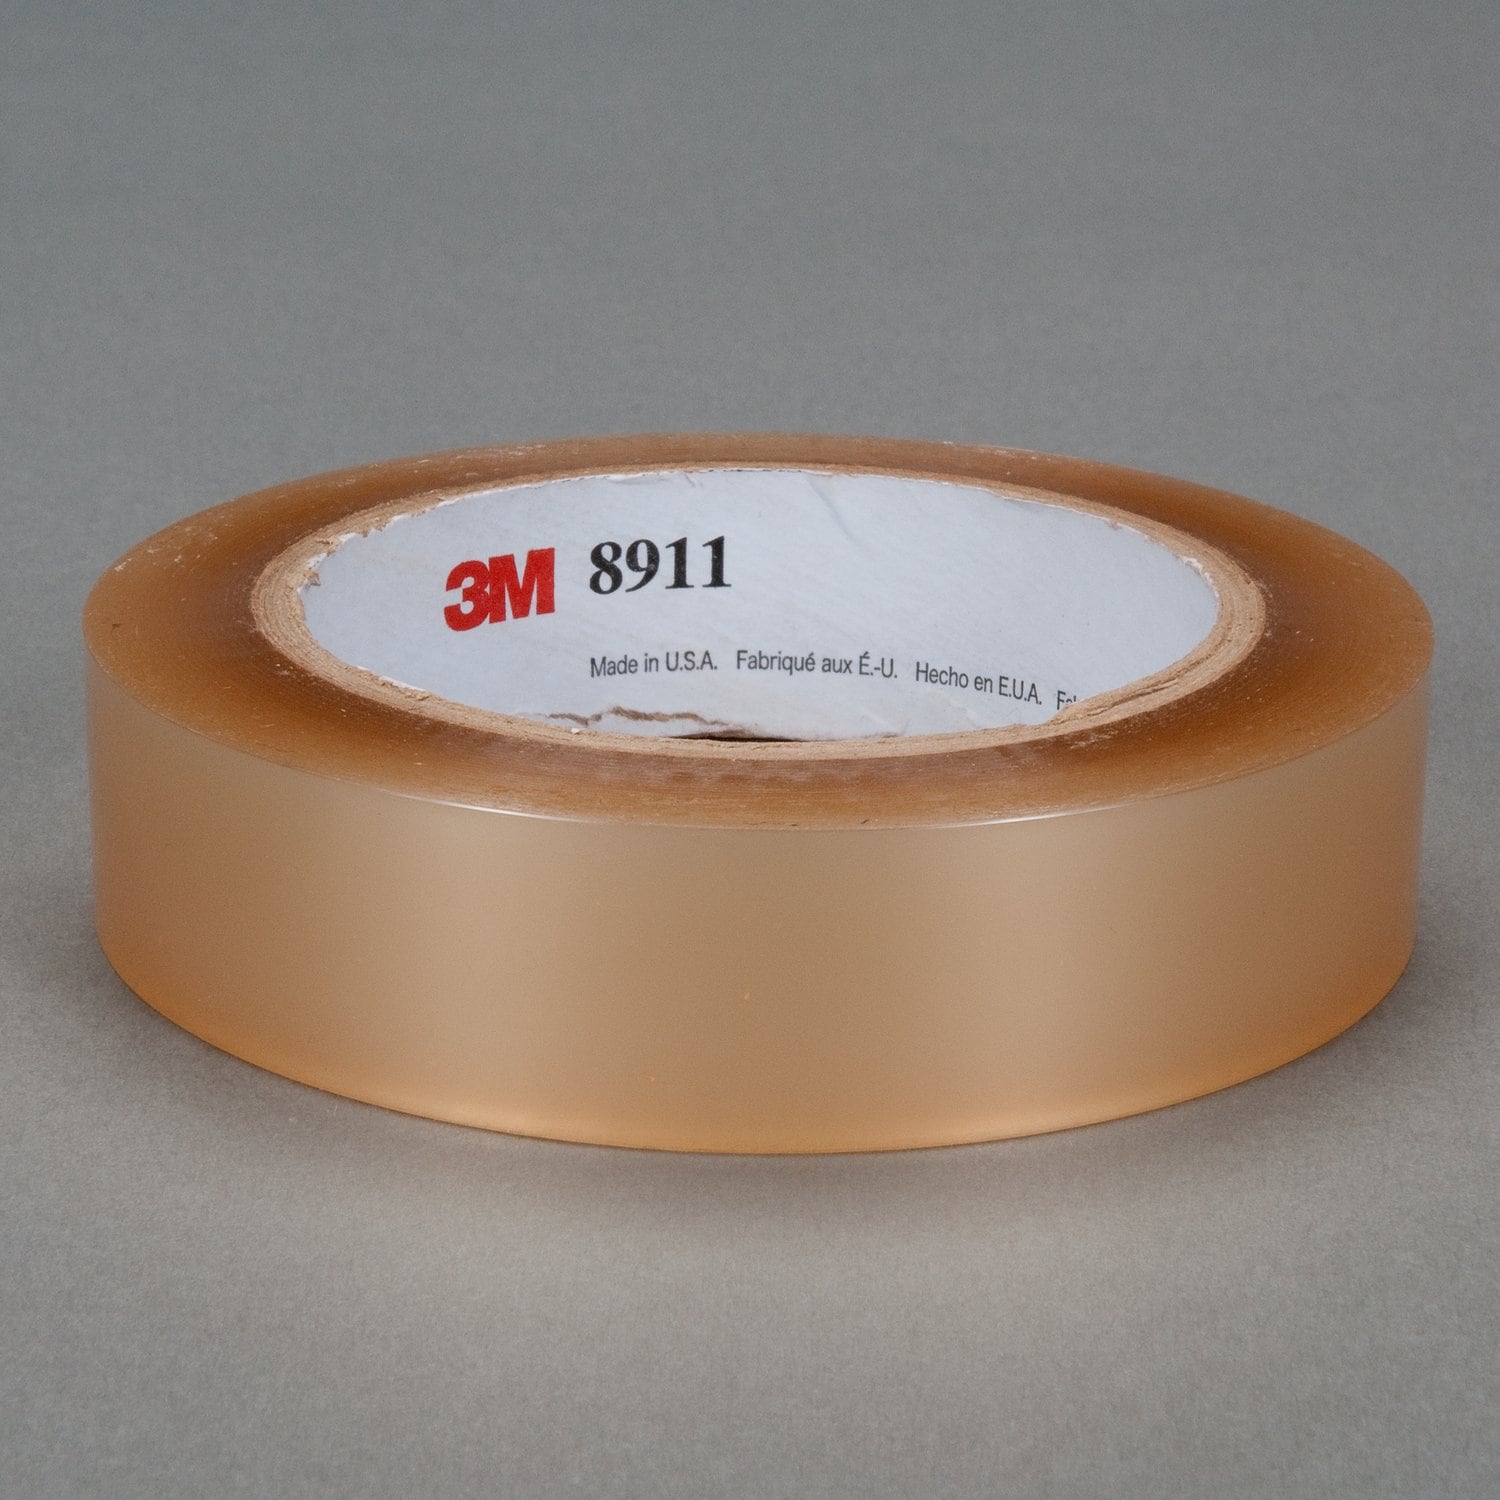 7000049594 - 3M Polyester Tape 8911, Transparent, 24 in x 72 yd, 2.3 mil, 1 roll per
case